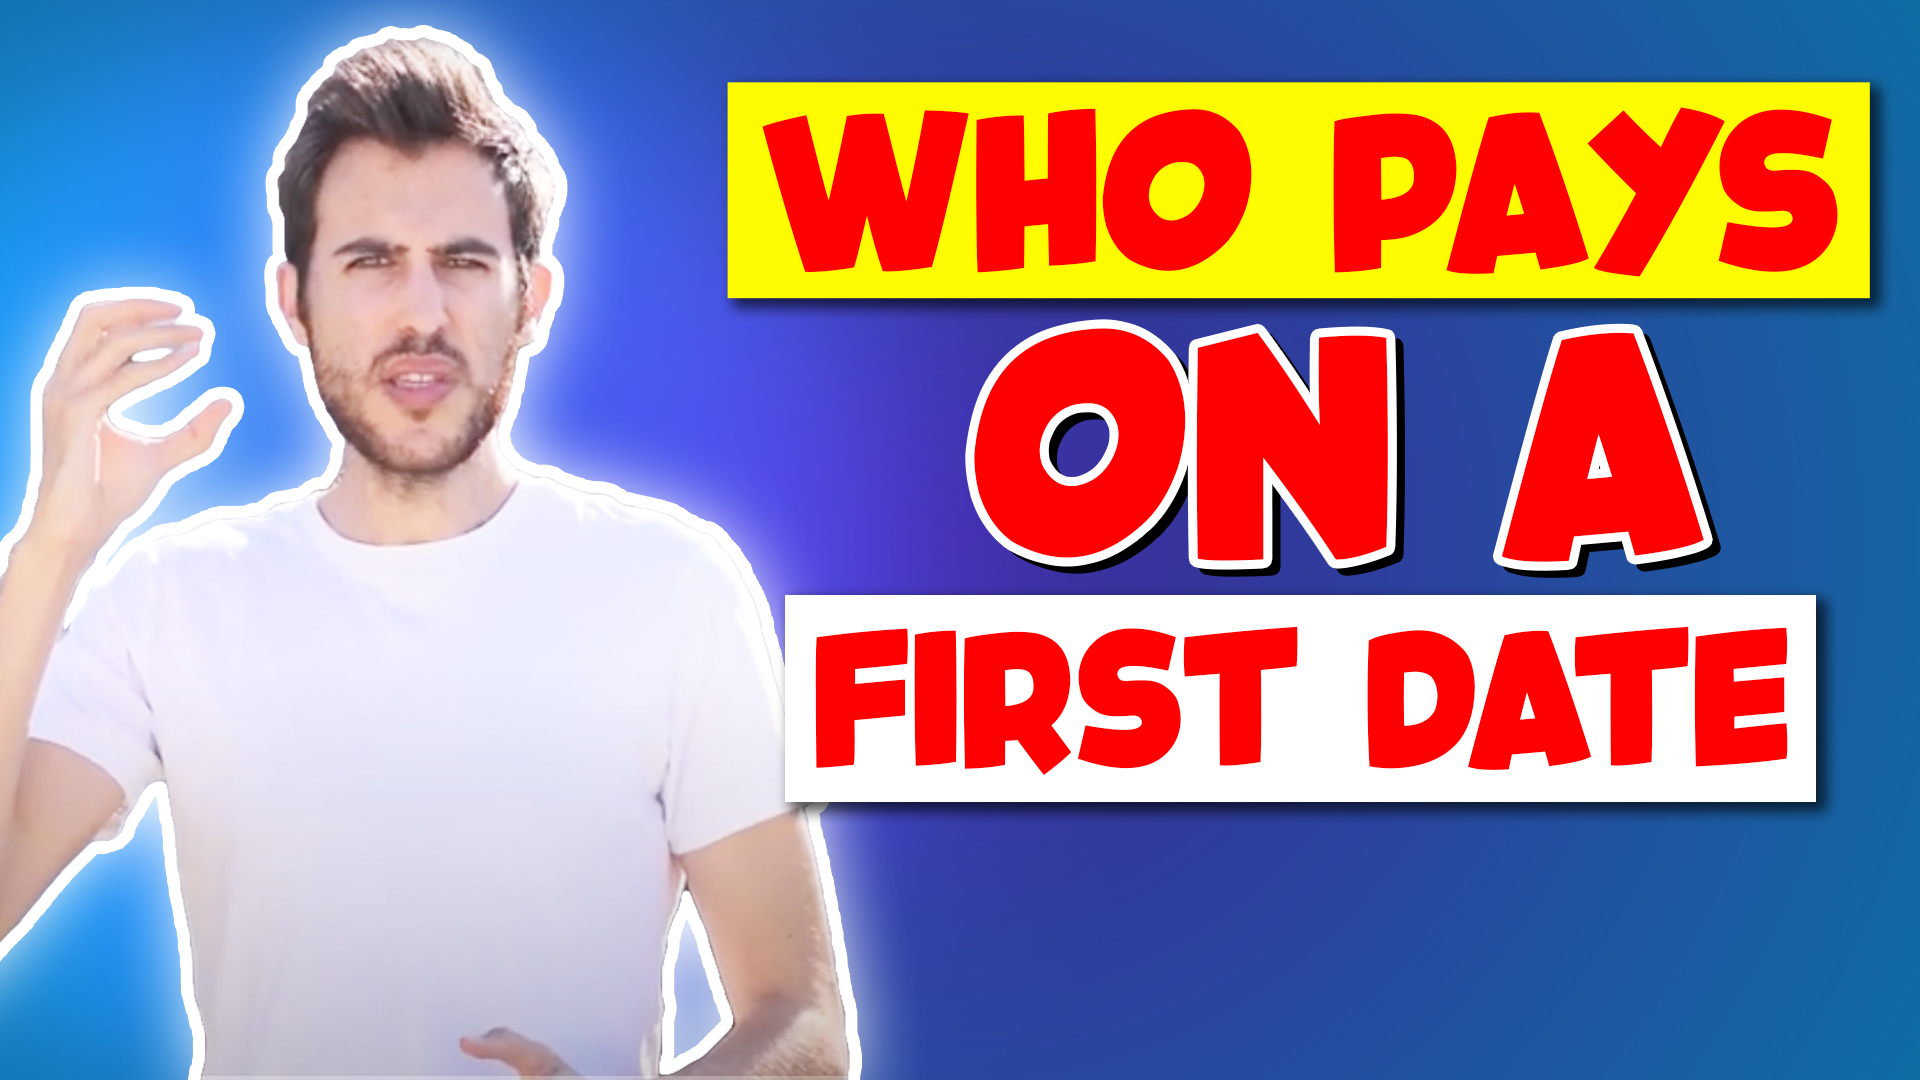 Who Pays On A First Date?